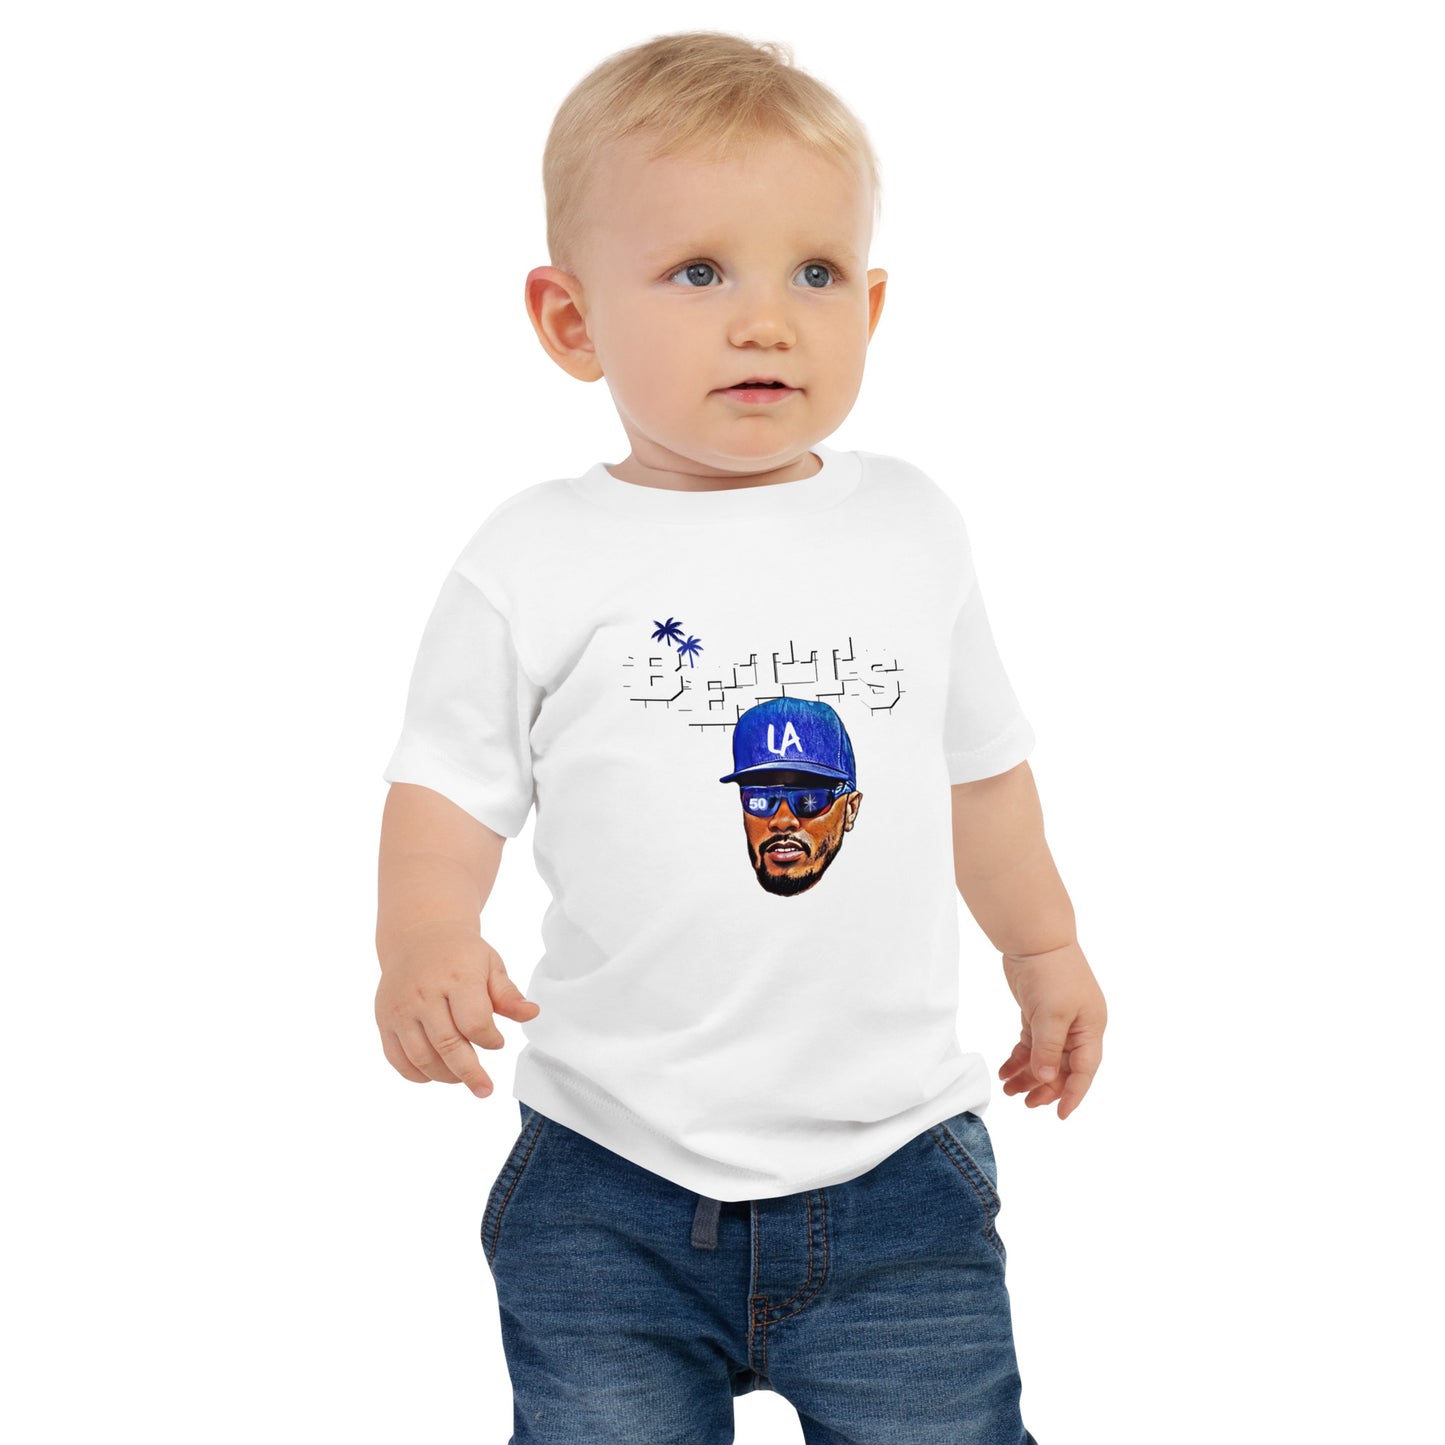 Betts on Hollywood (Baby 6-24 mo.)